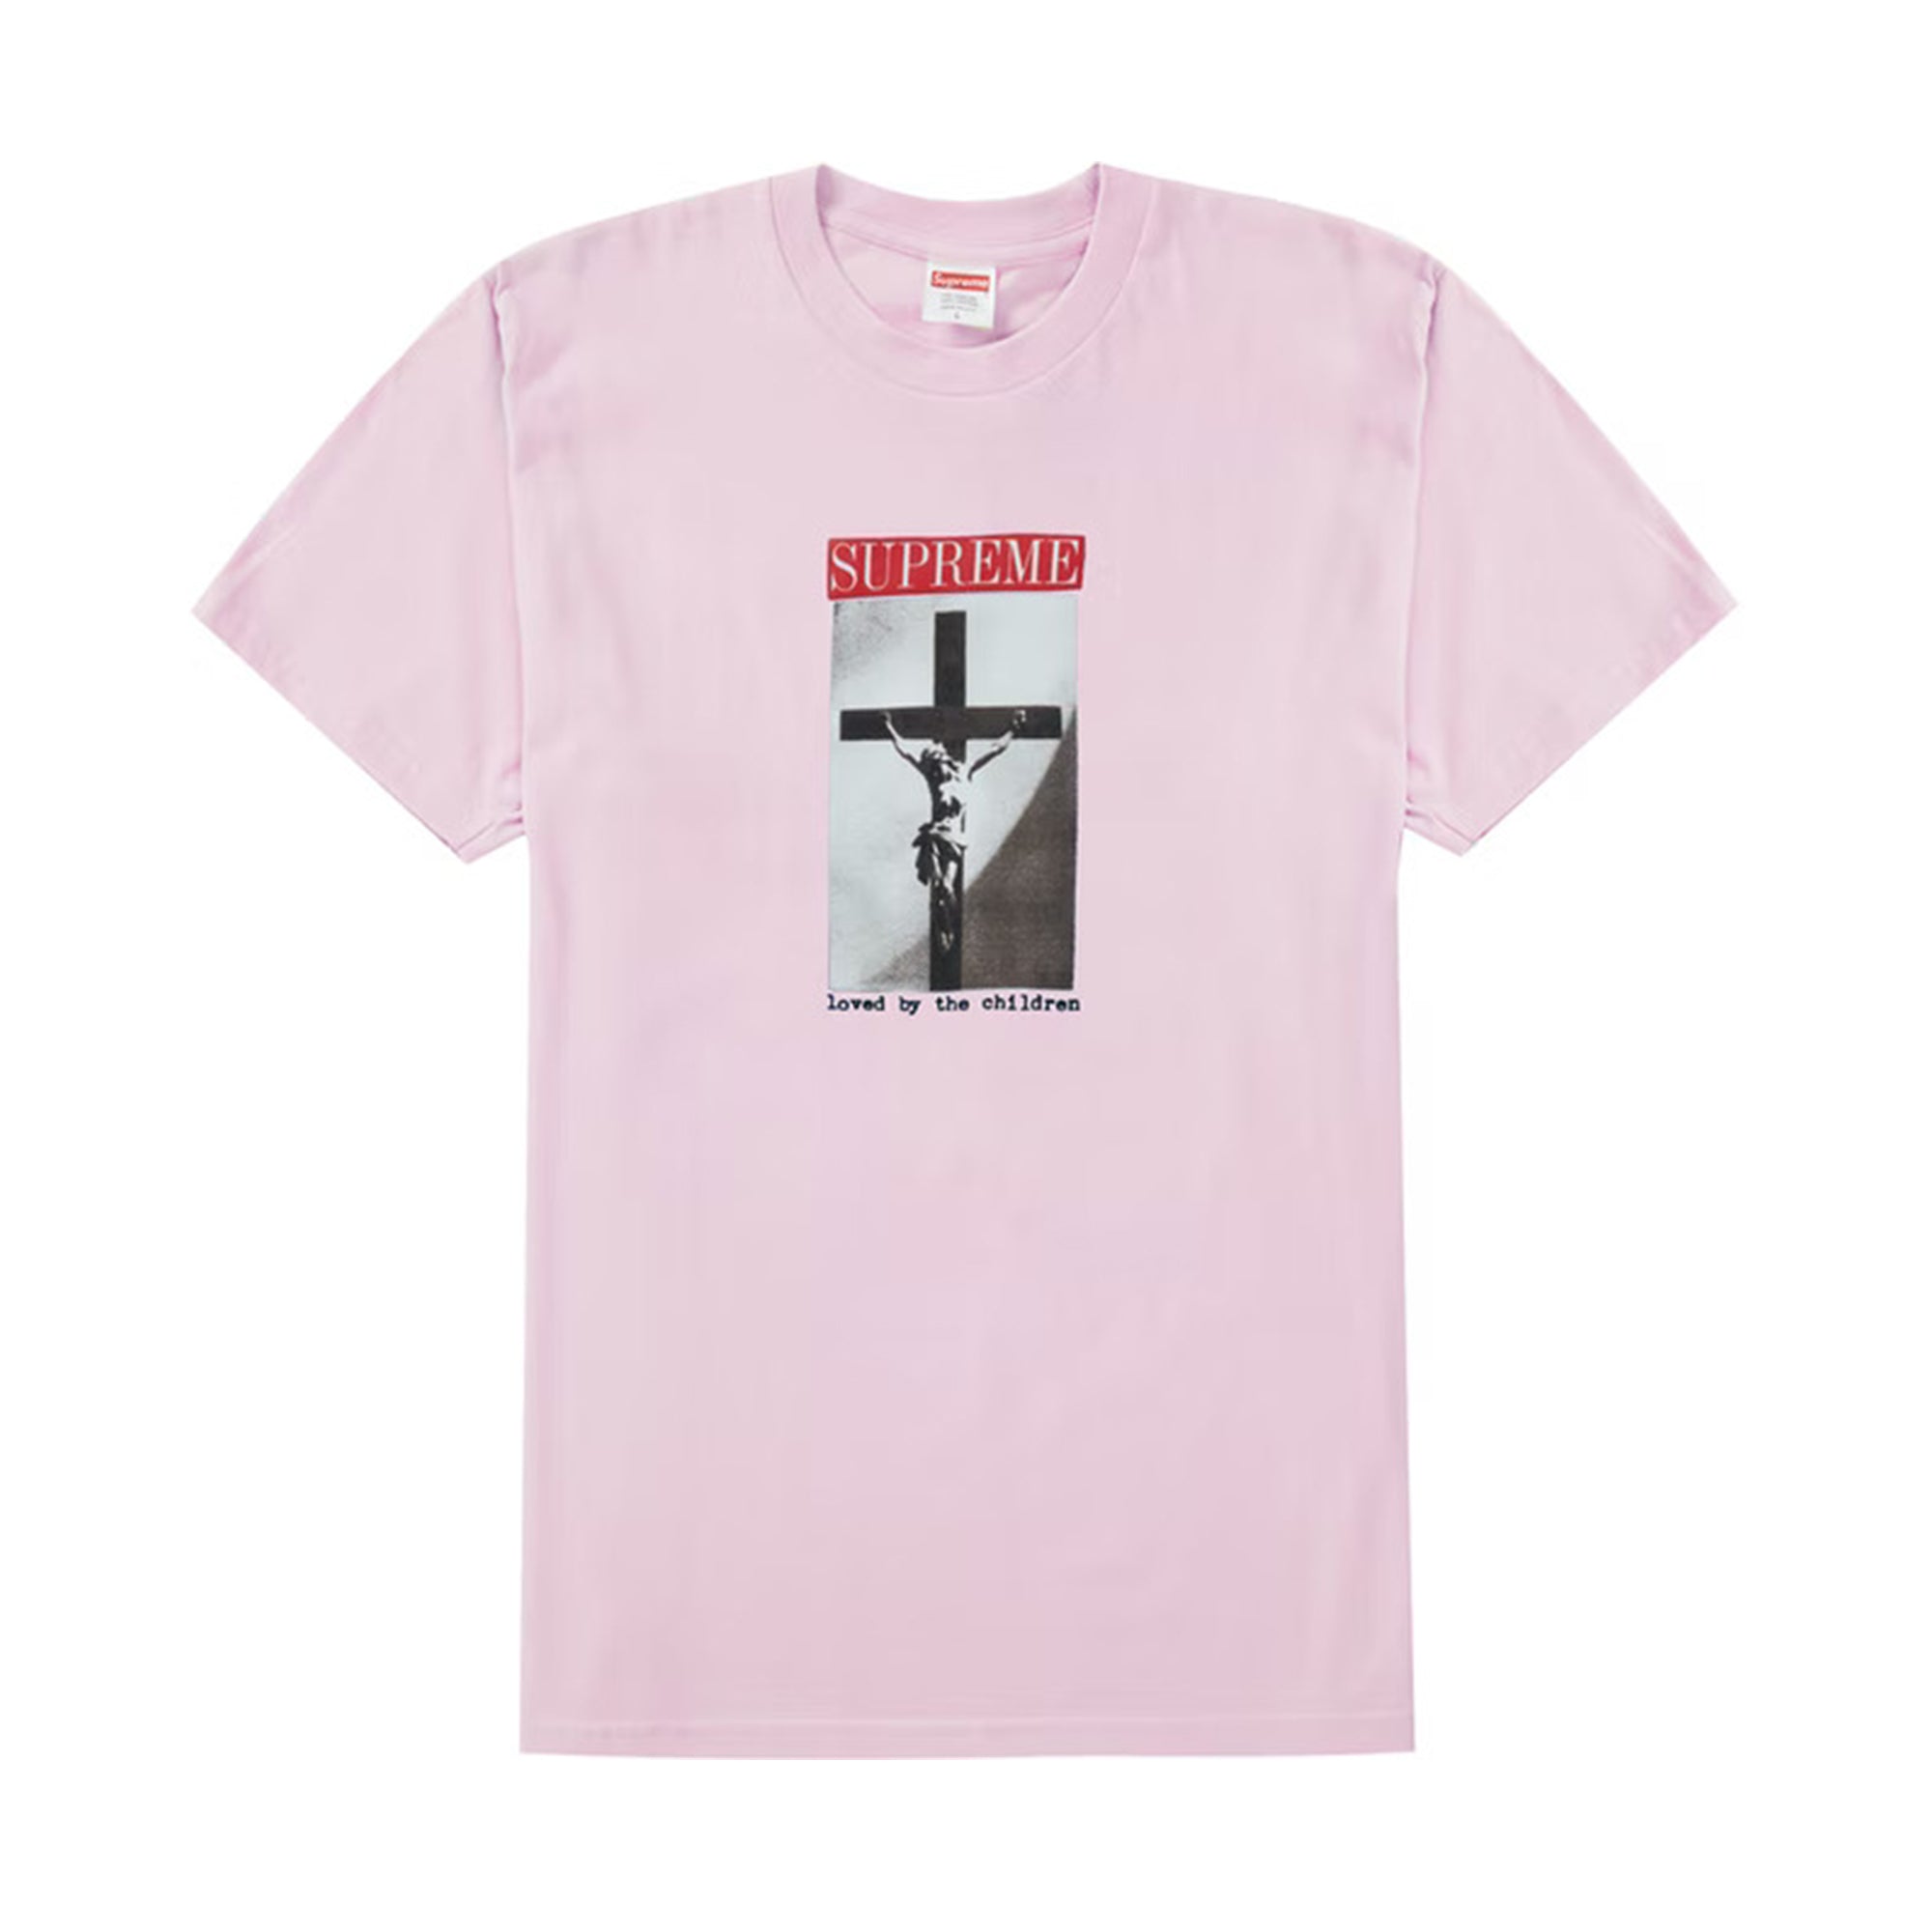 Supreme Loved By The Children Tee Light Pink-PLUS